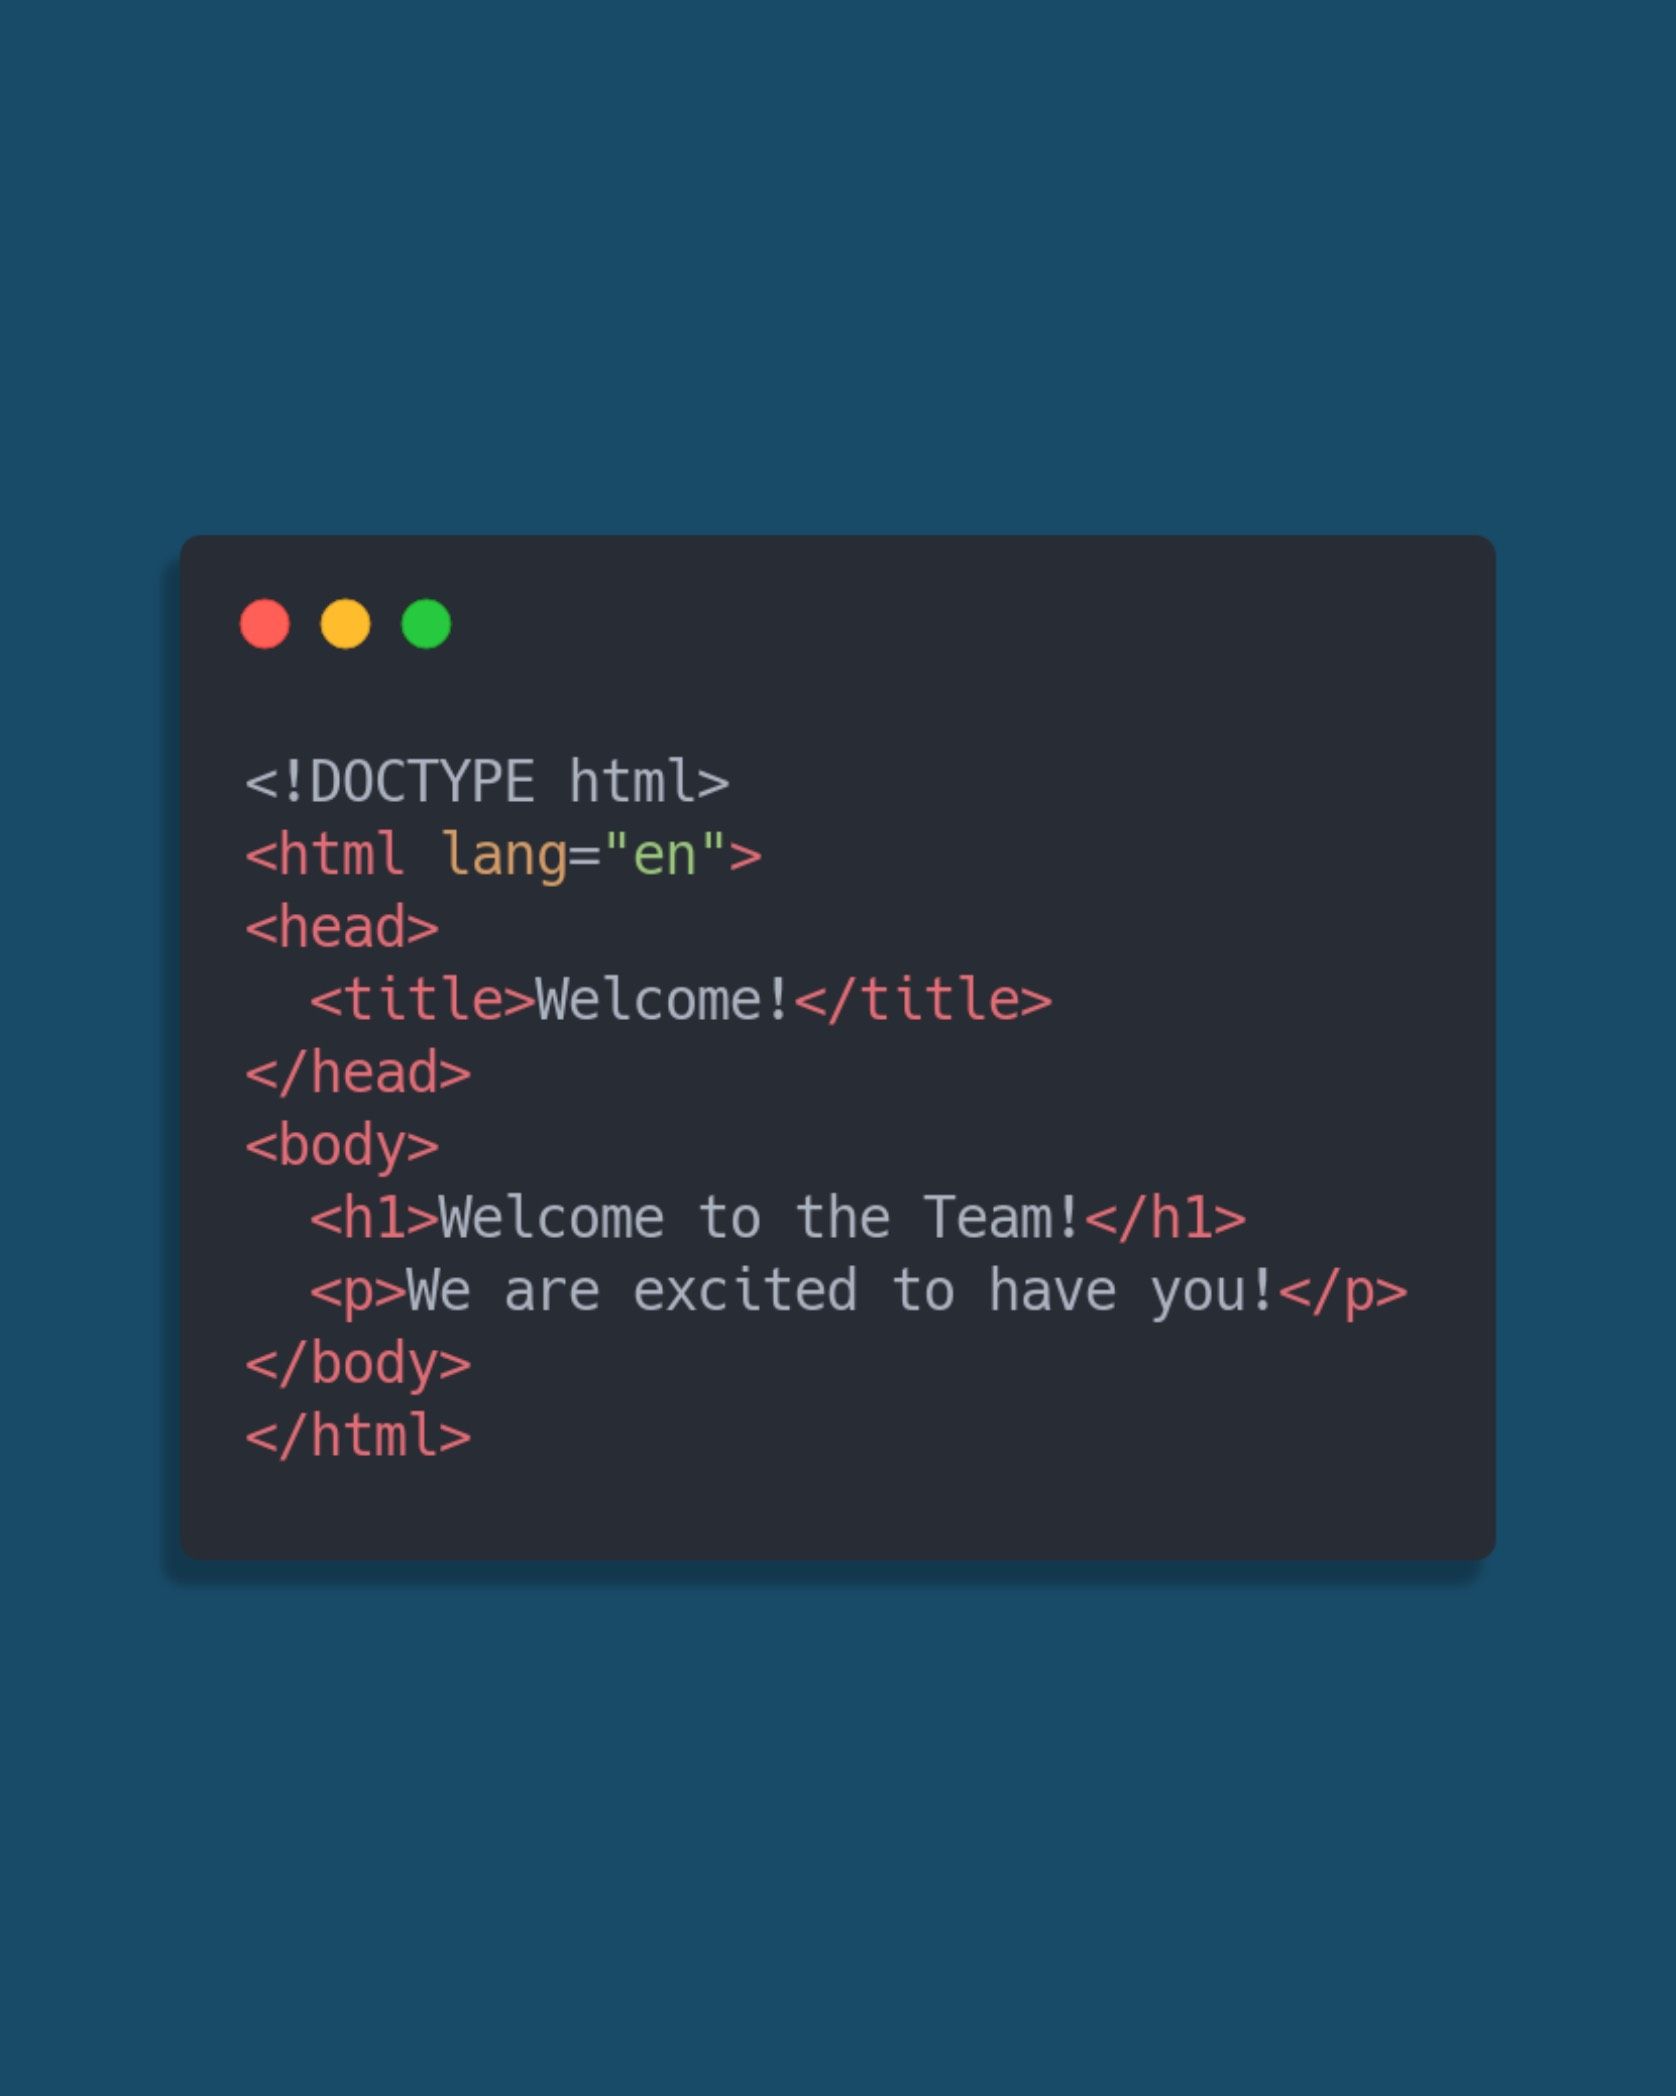 Card design "Welcome HTML code"